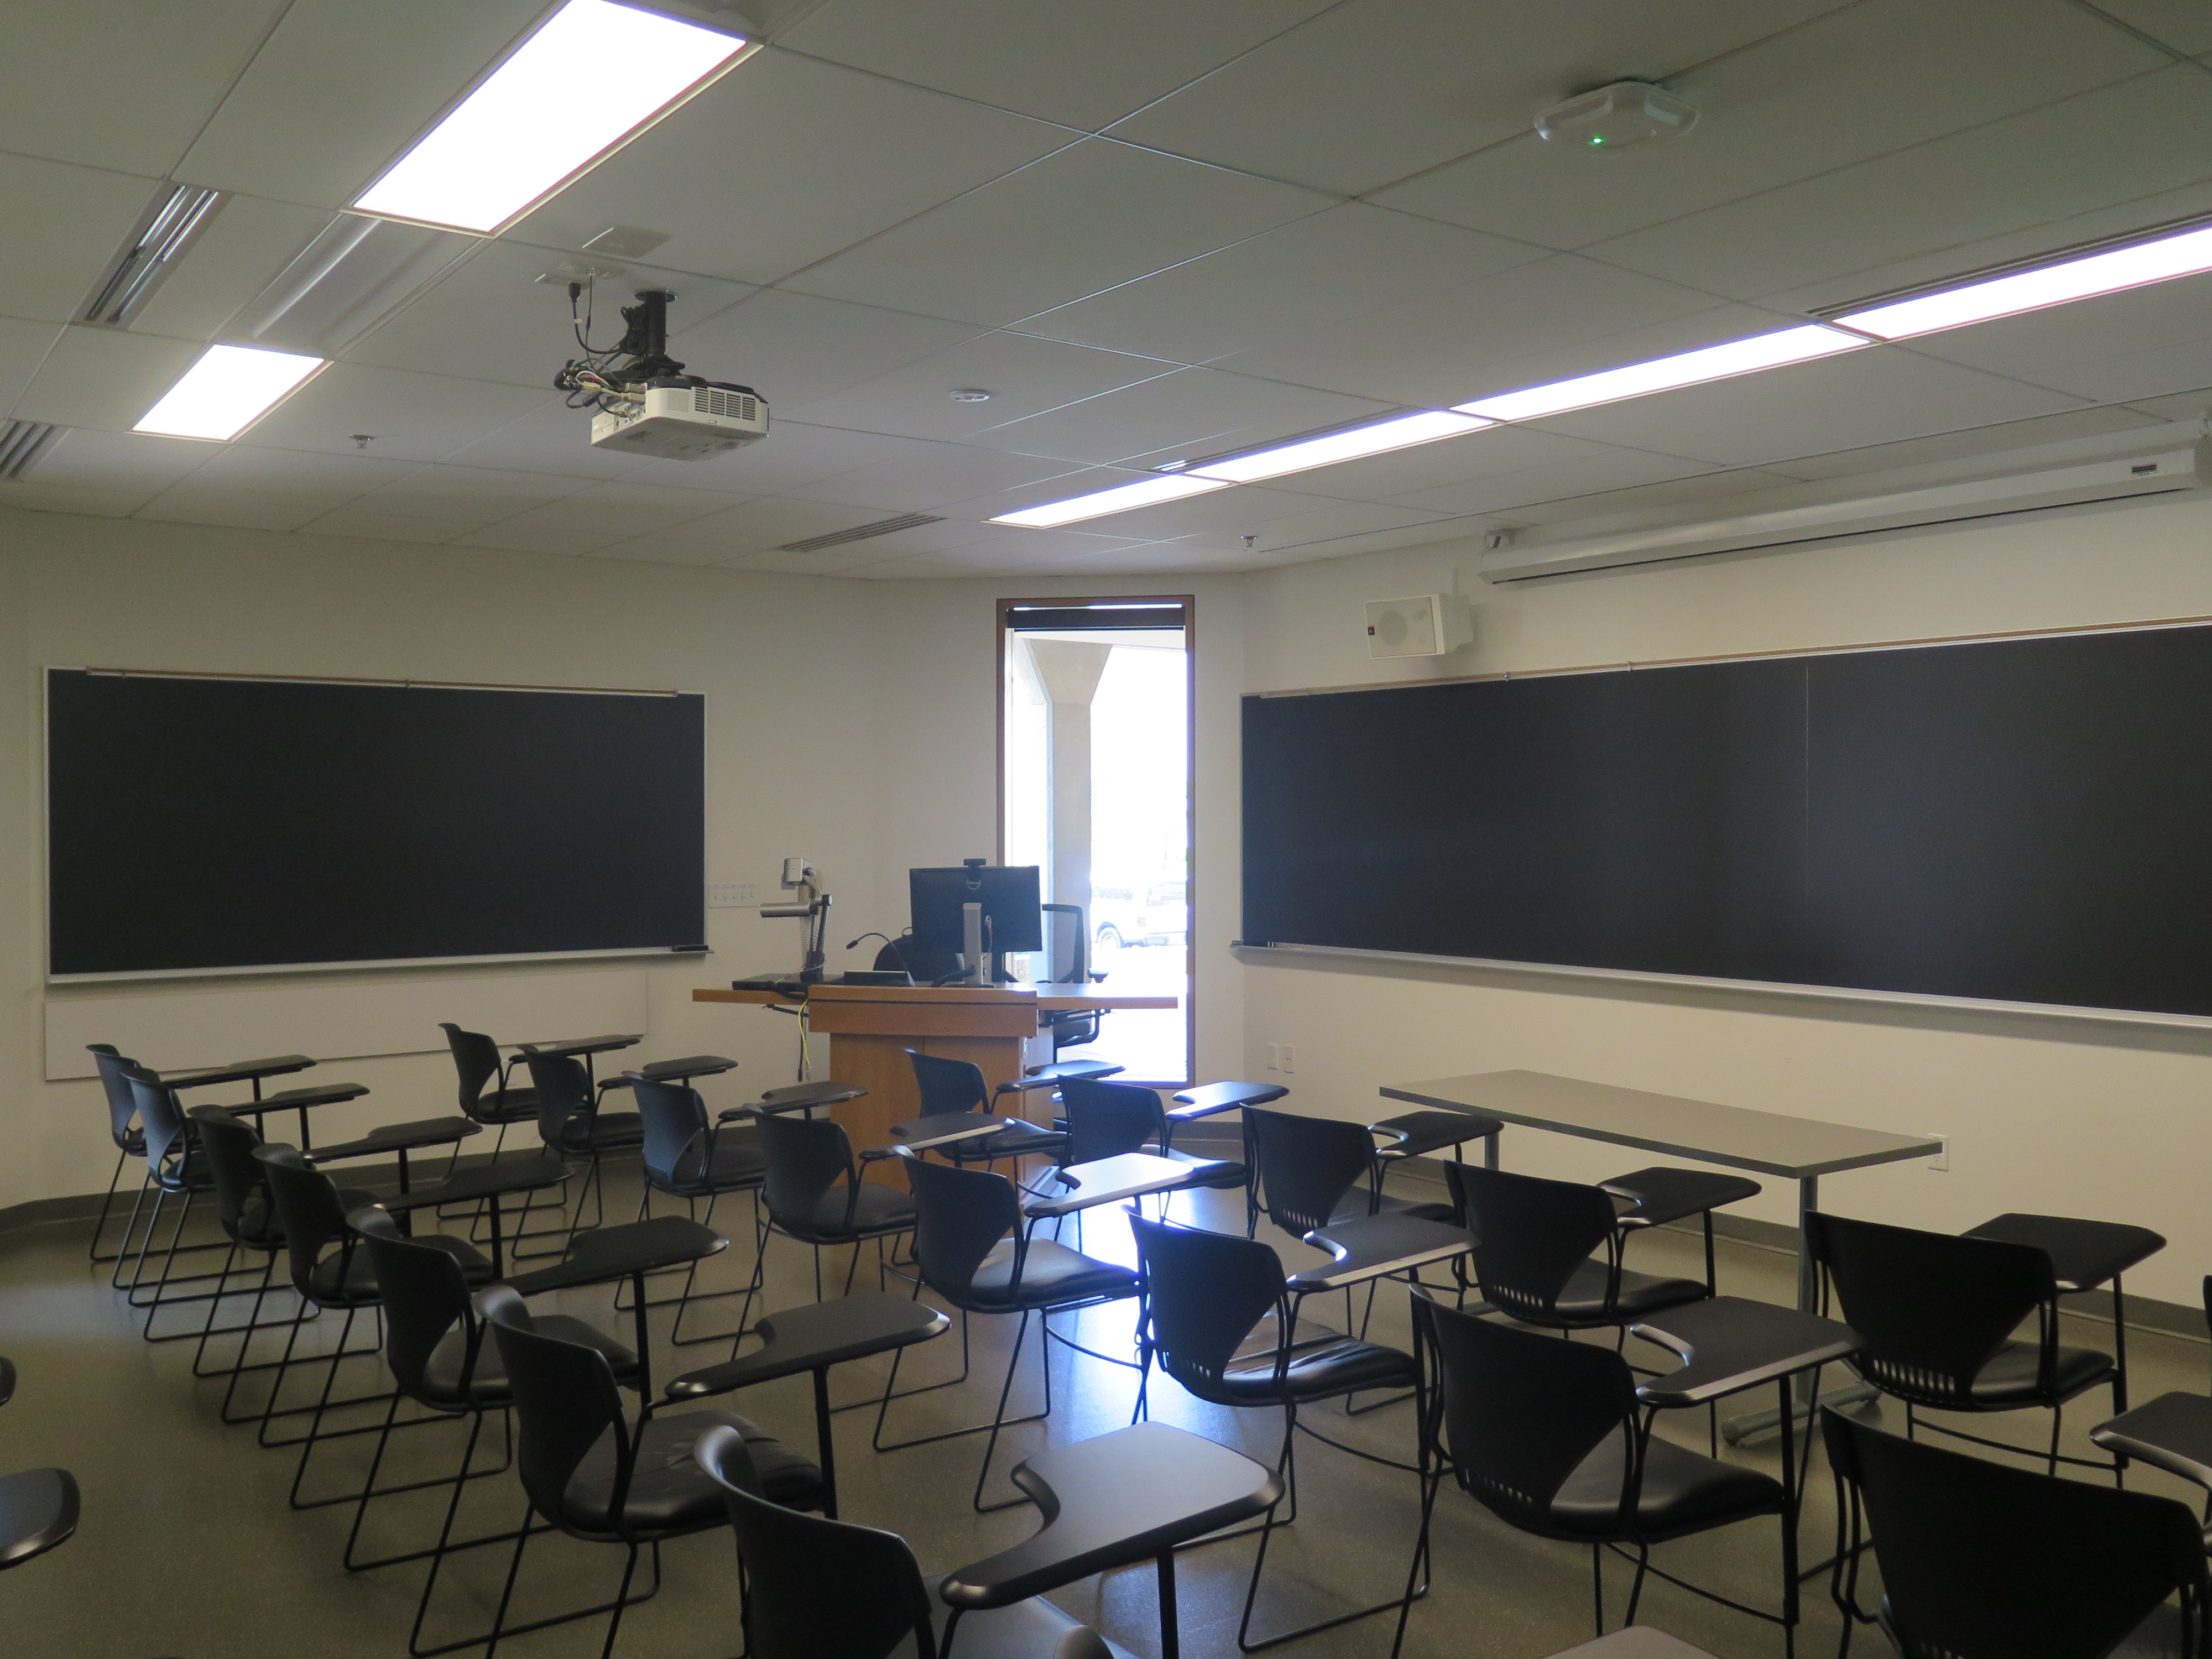 Room Consists of hard floors, moveable tablet armchairs, a chalk board and podium are both located at the front of the room with chalk boards located on the outer walls.